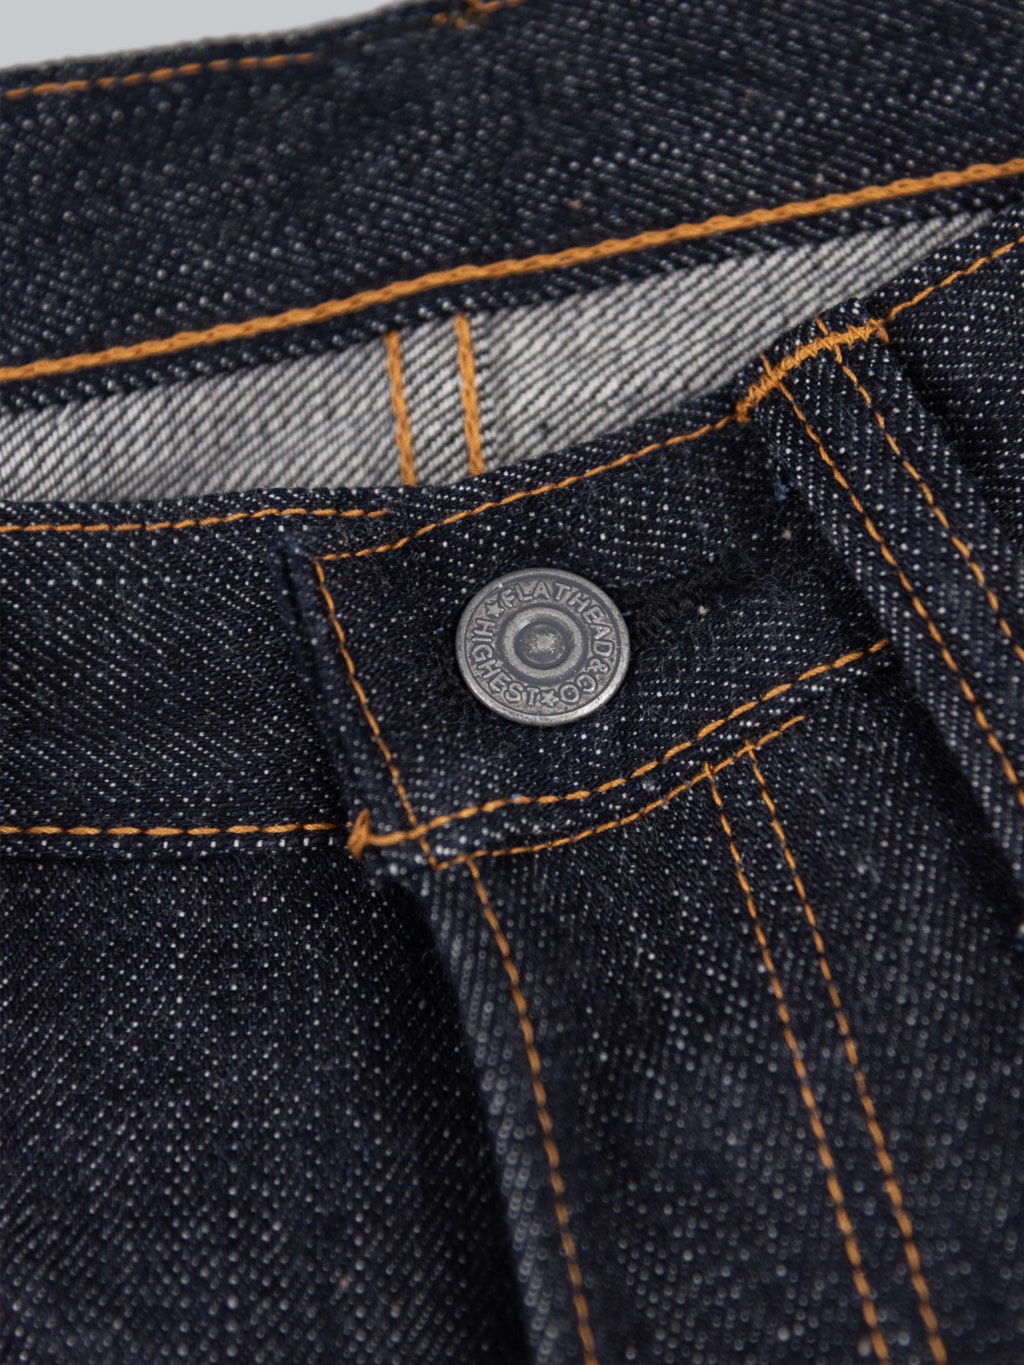 The Flat Head 3009 14.5oz straight tapered Jeans iron button